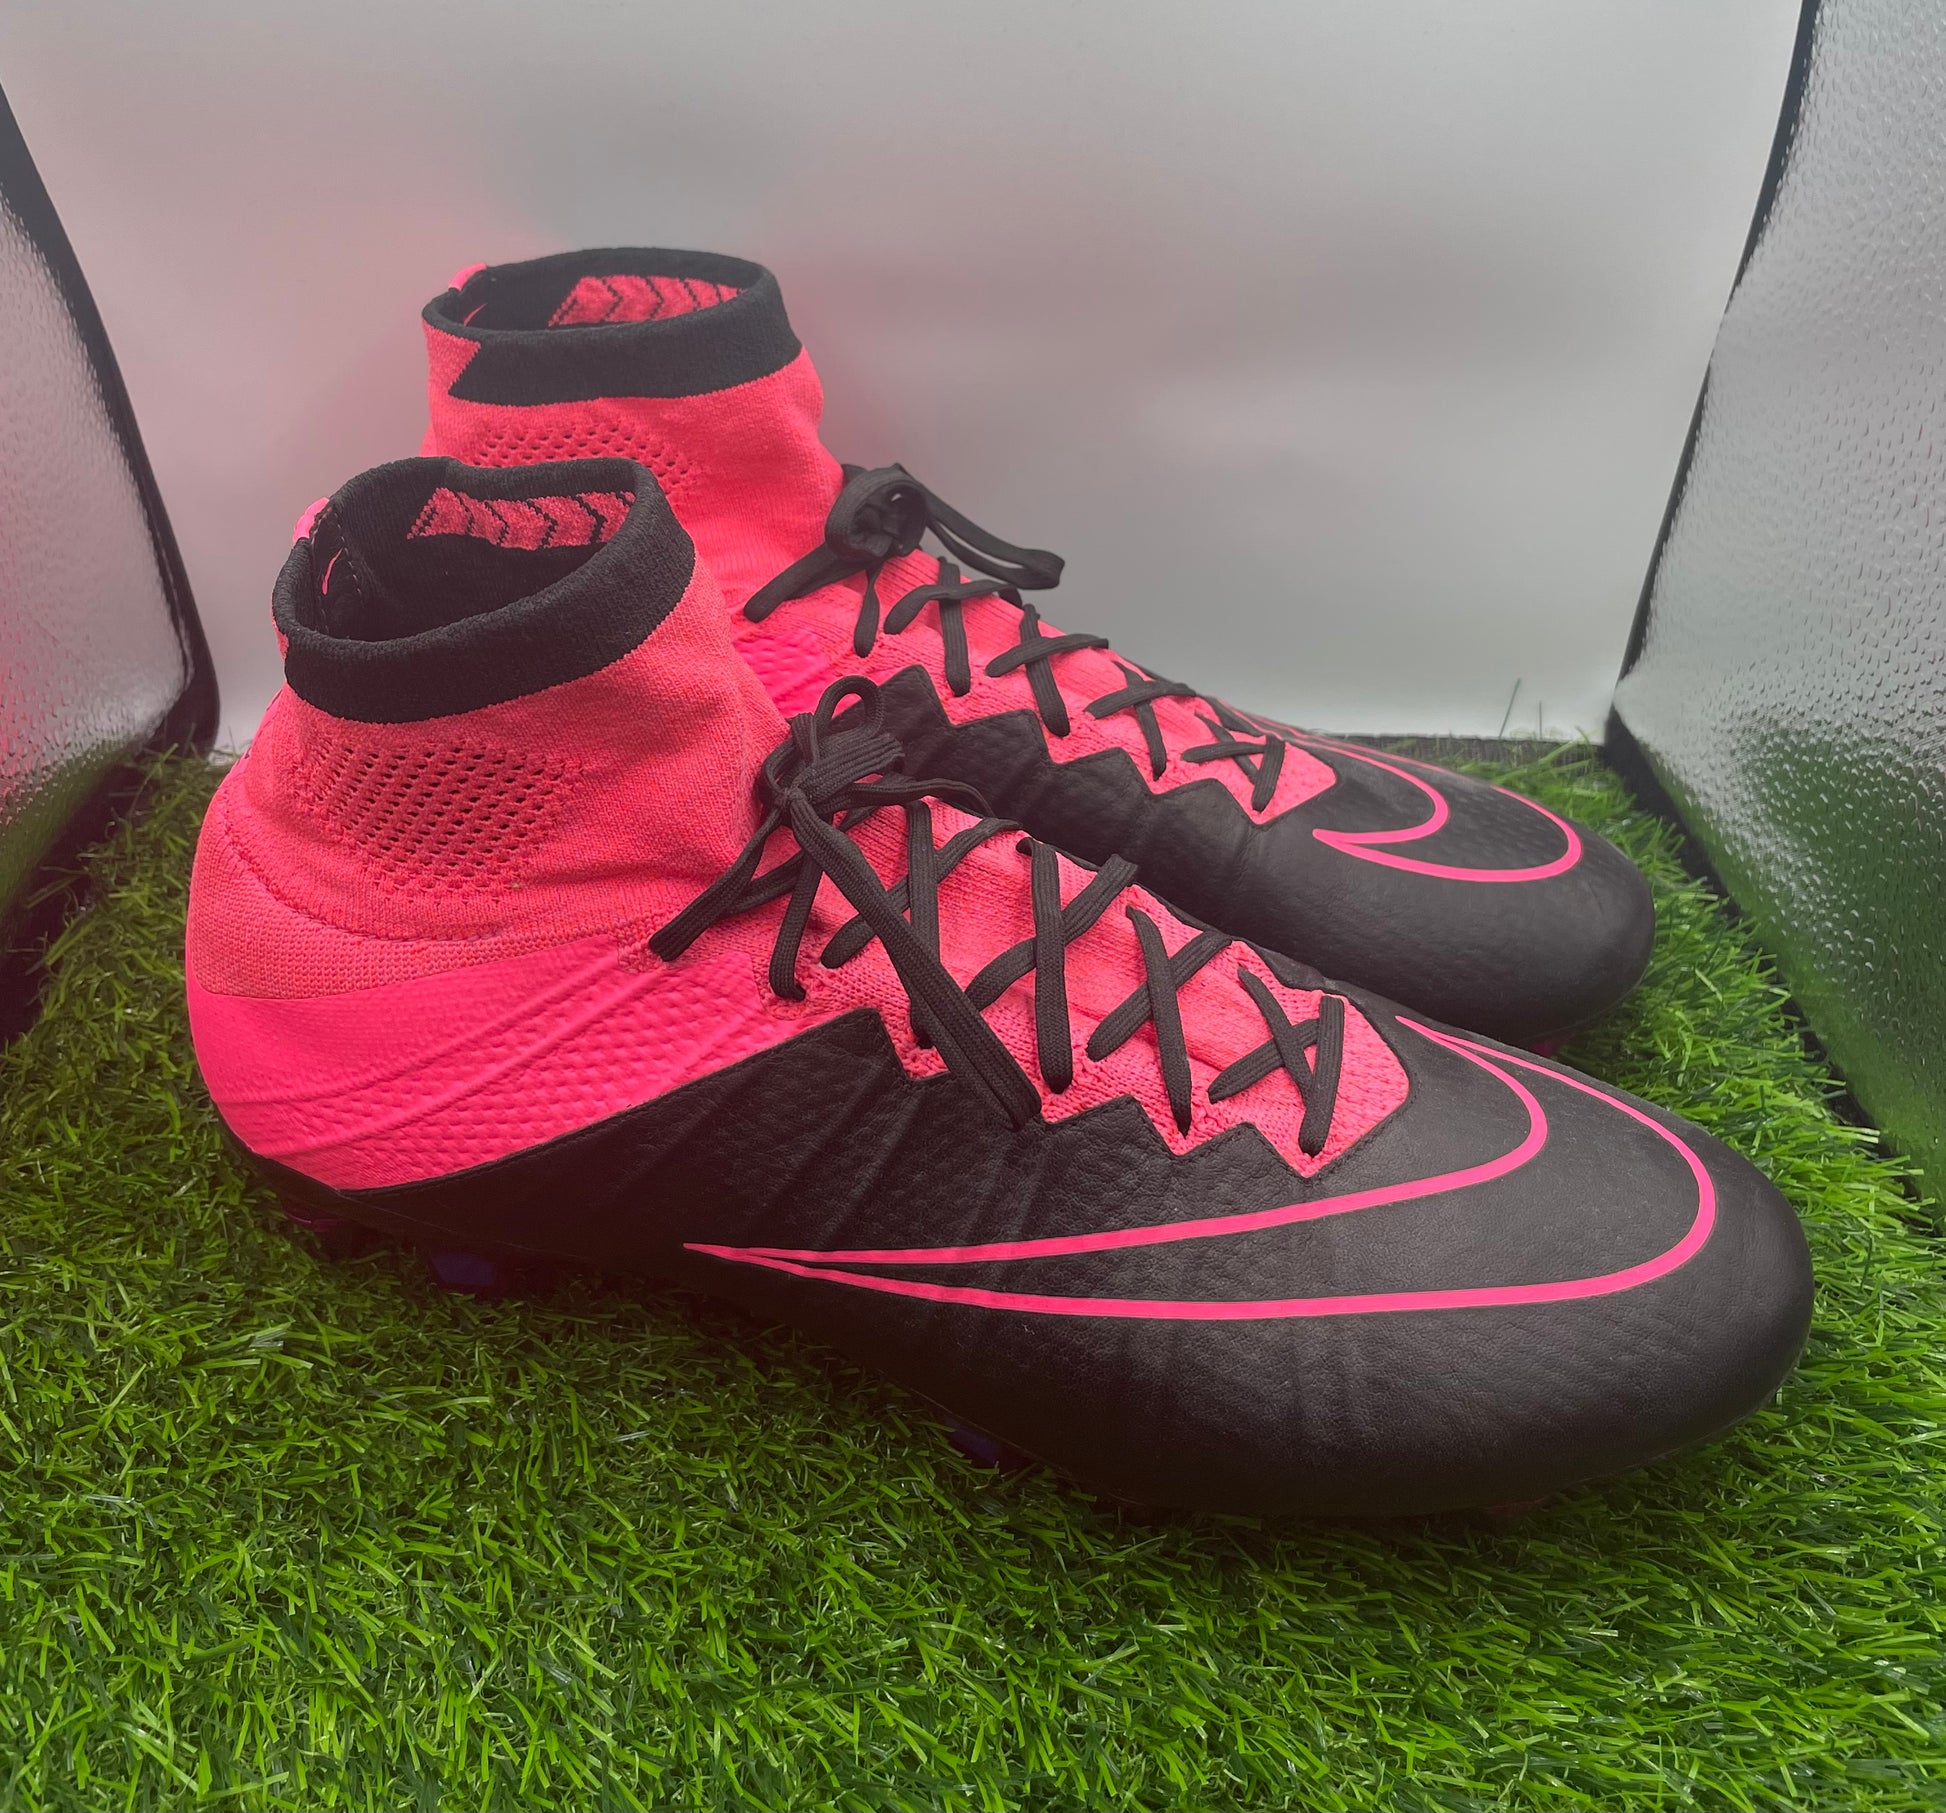 Nike superfly pink/black SG – Beyond boots